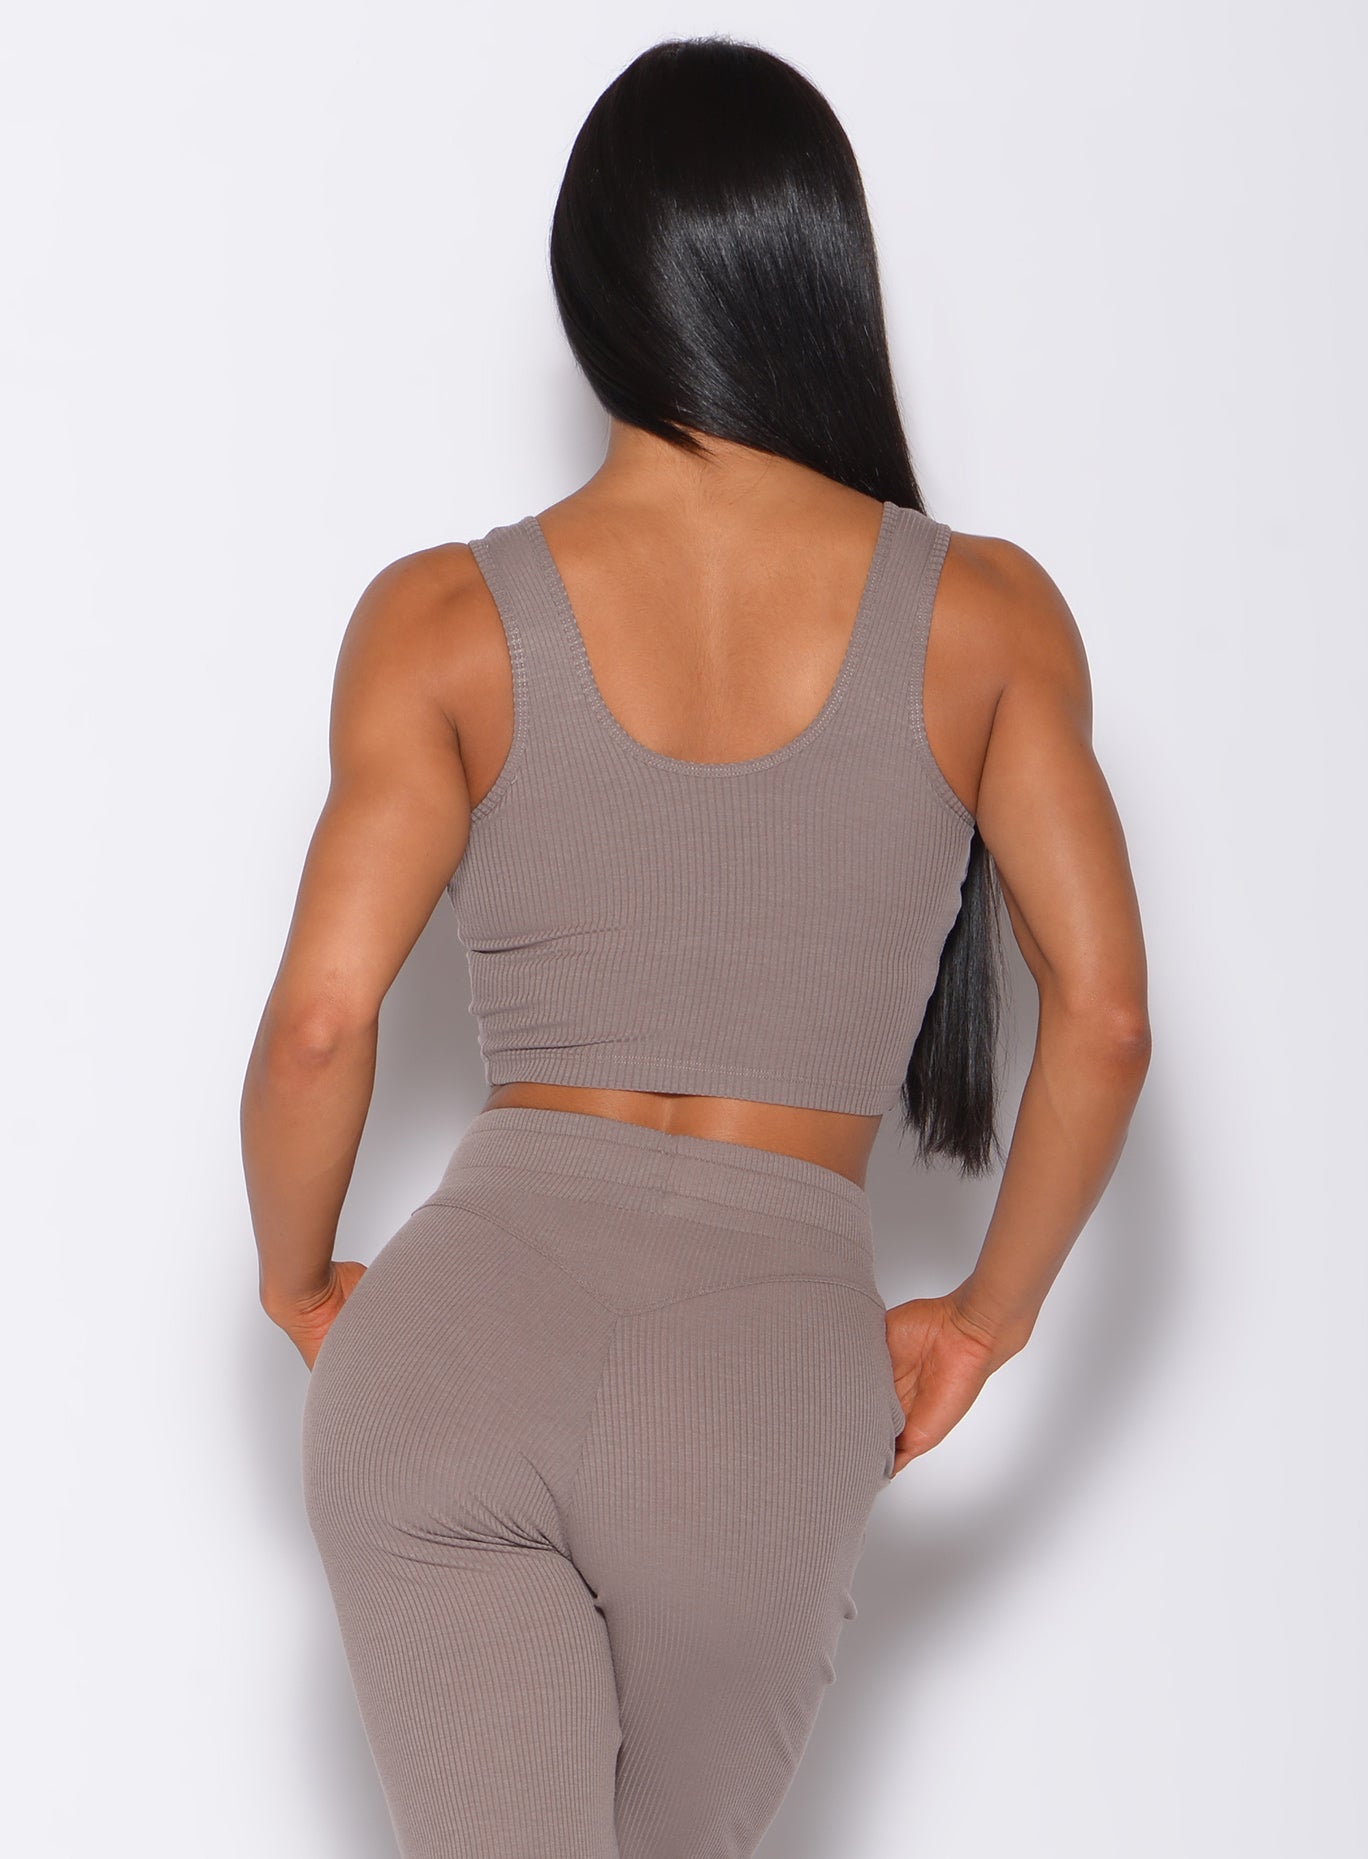 Back profile view of a model wearing our henley long bra in toffee color along with a matching joggers